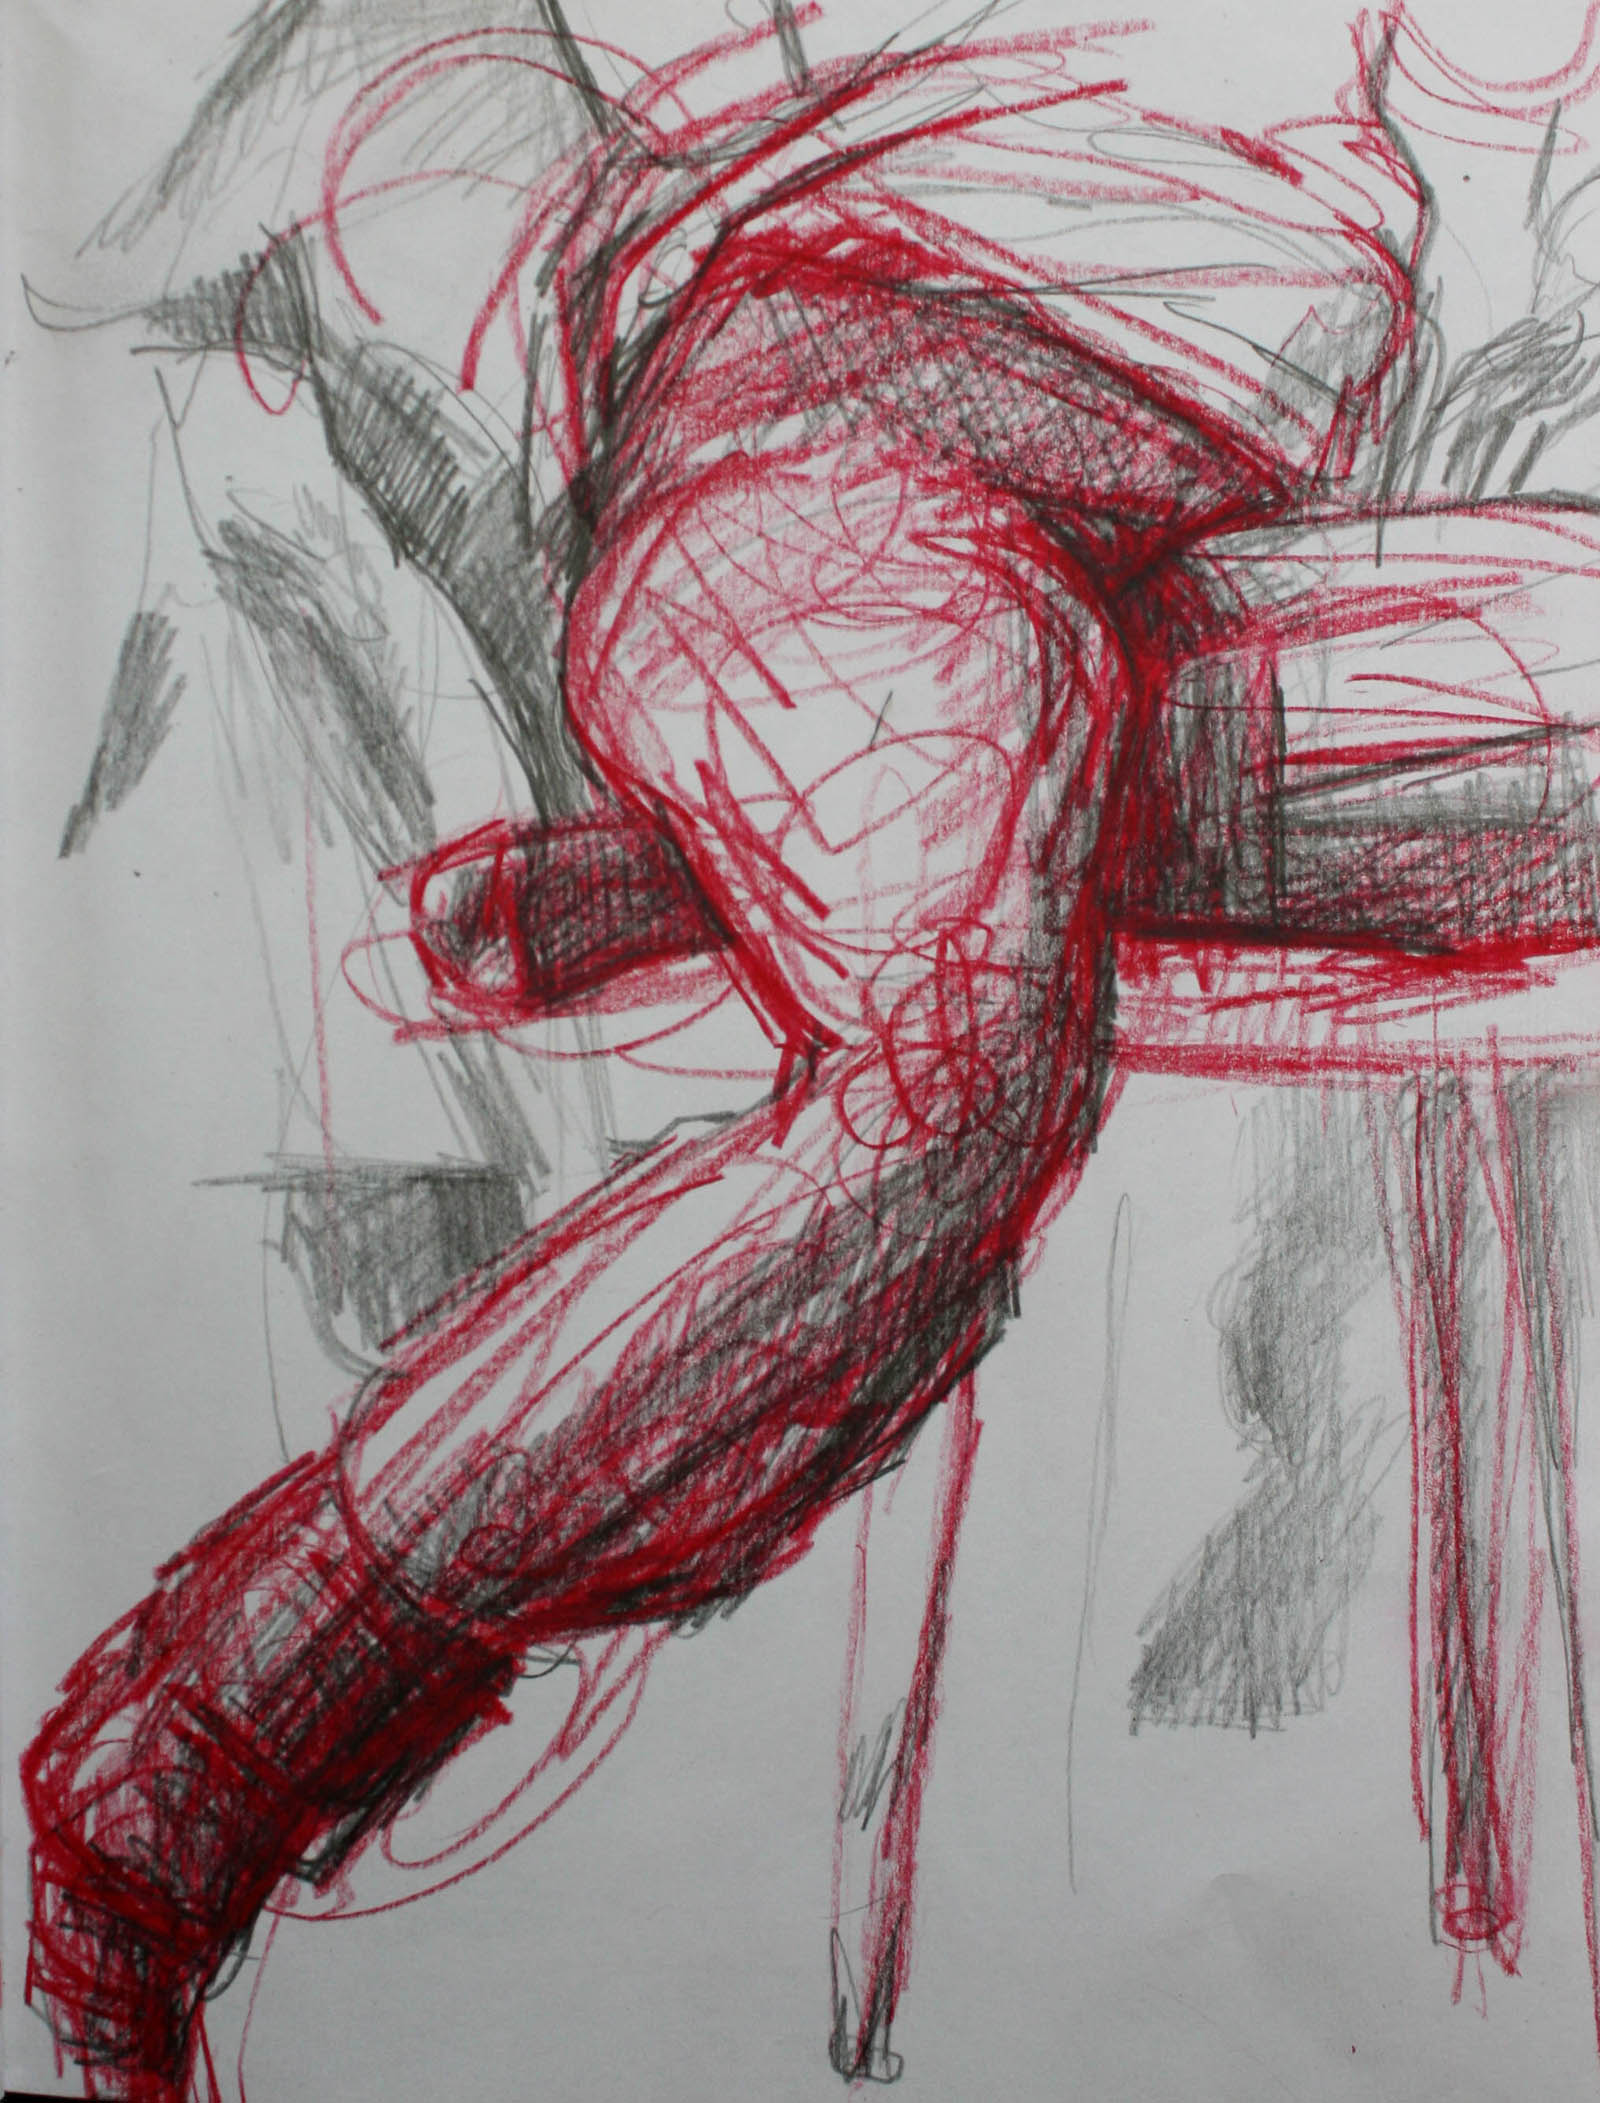   Red Legs , 2014. Graphite and wax crayon on paper, 14 x 11" 